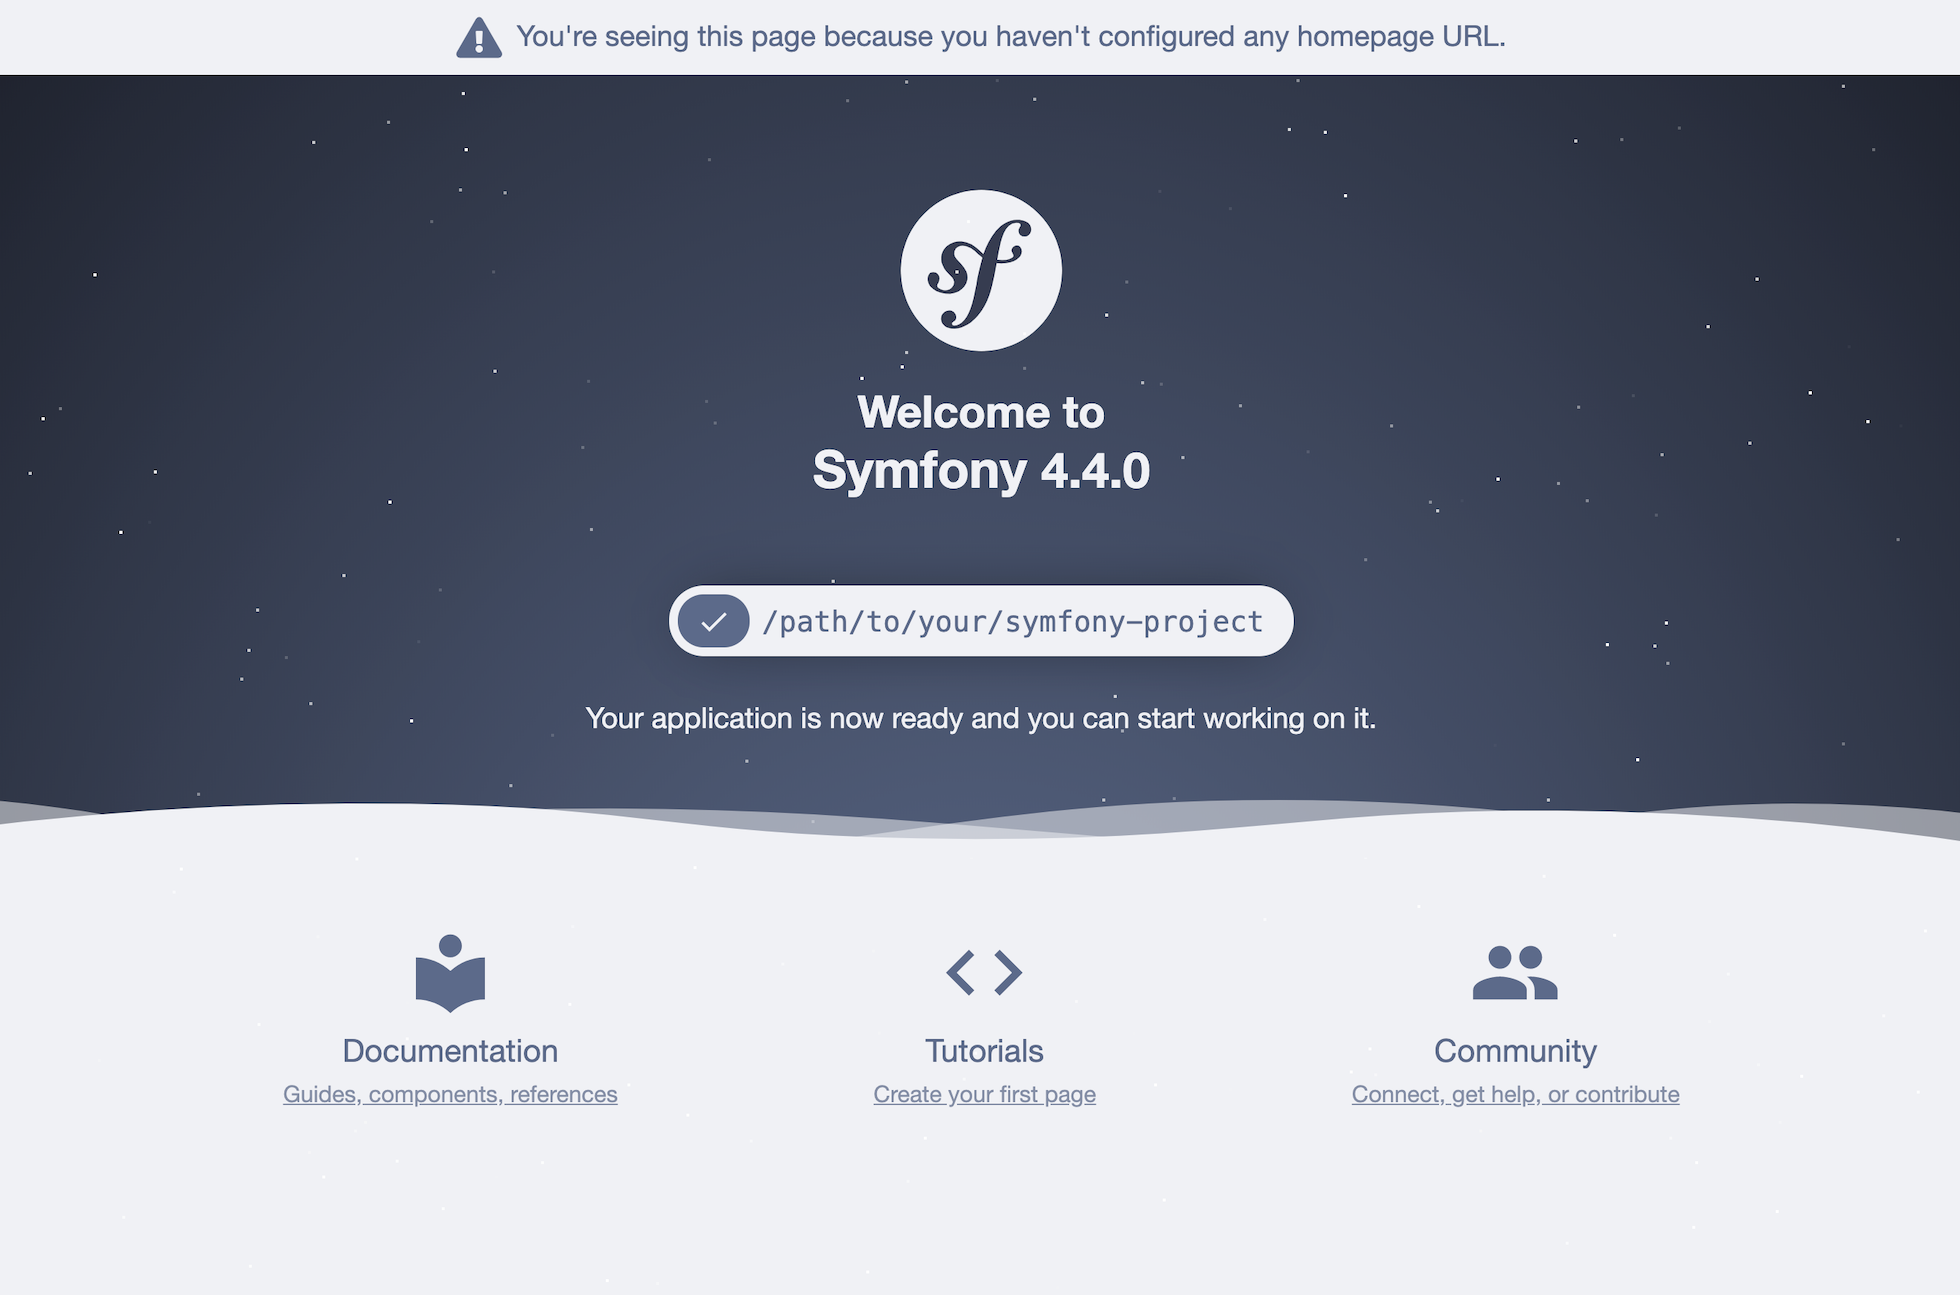 The Symfony Welcome Page in Symfony 4.4 and newer versions